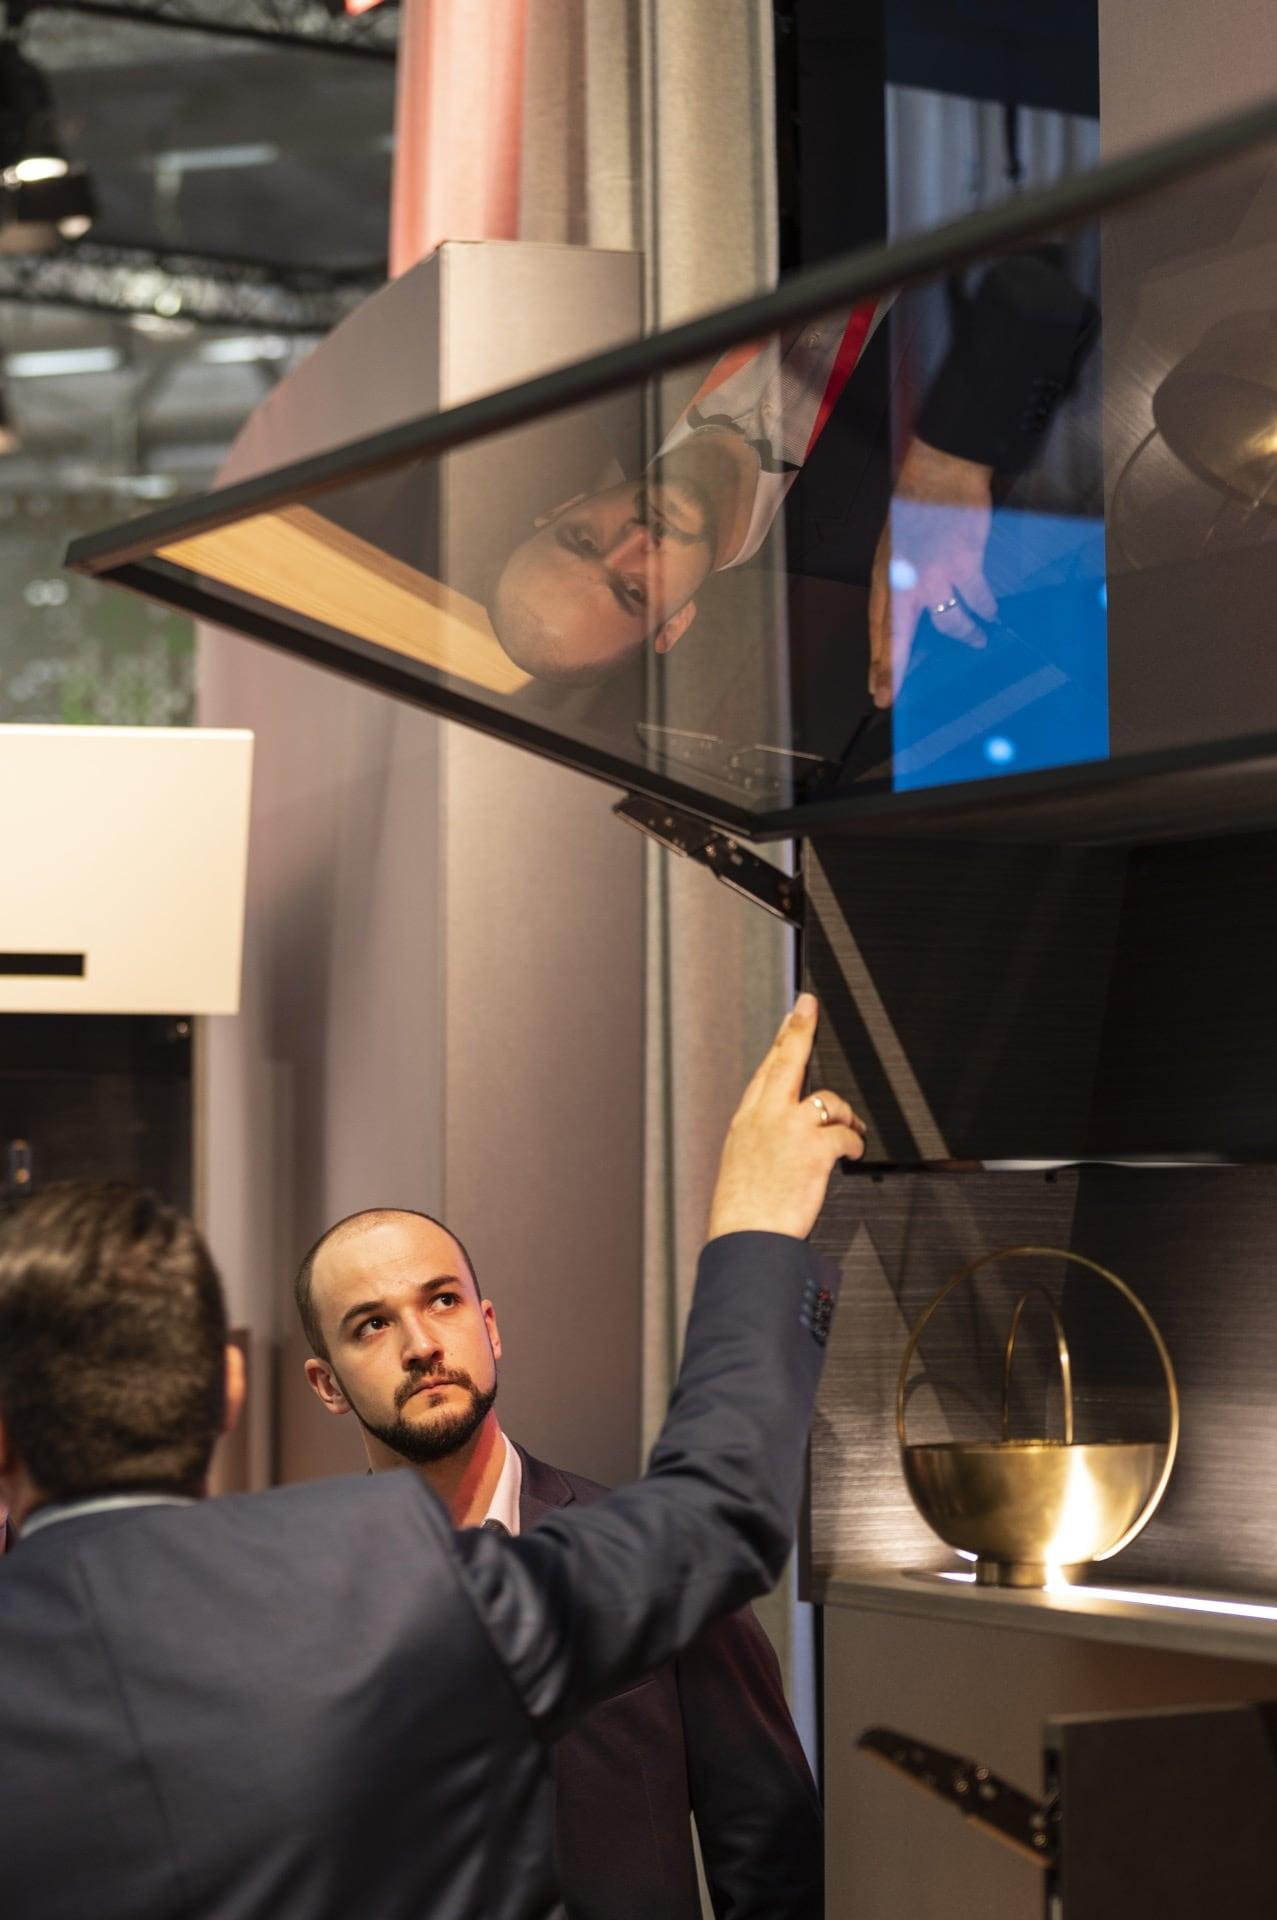 Stay lift with integrated fitting implemented with AVENTOS HKi, an alu frame and a glass front.